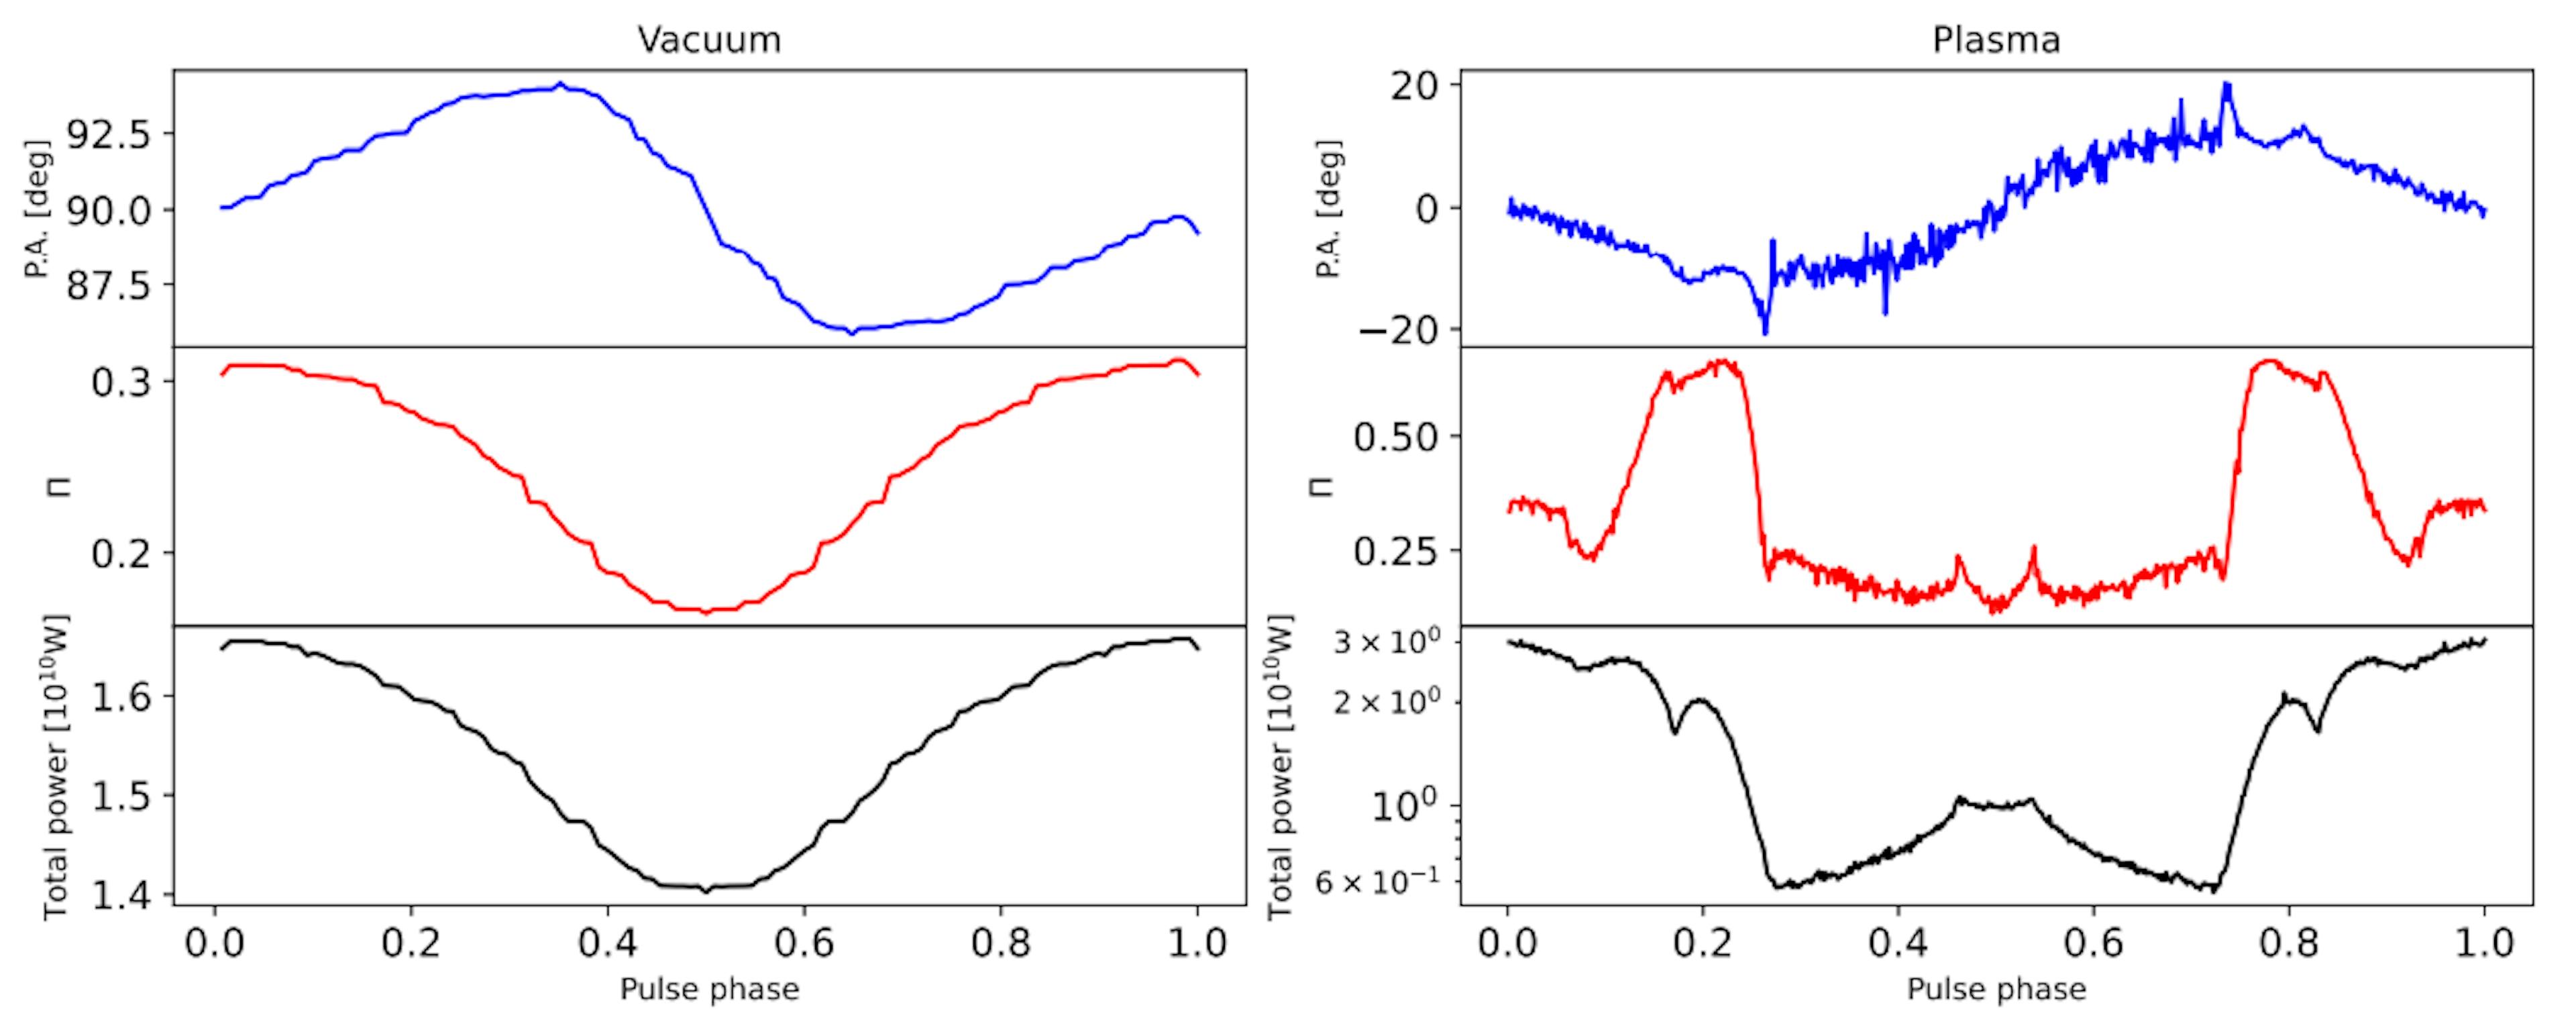 FIG. 4. Axion-induced radio emission as a function of pulse phases: vacuum versus plasma. This figure is the same as Fig. 2,only with a different viewing angle of 72◦.